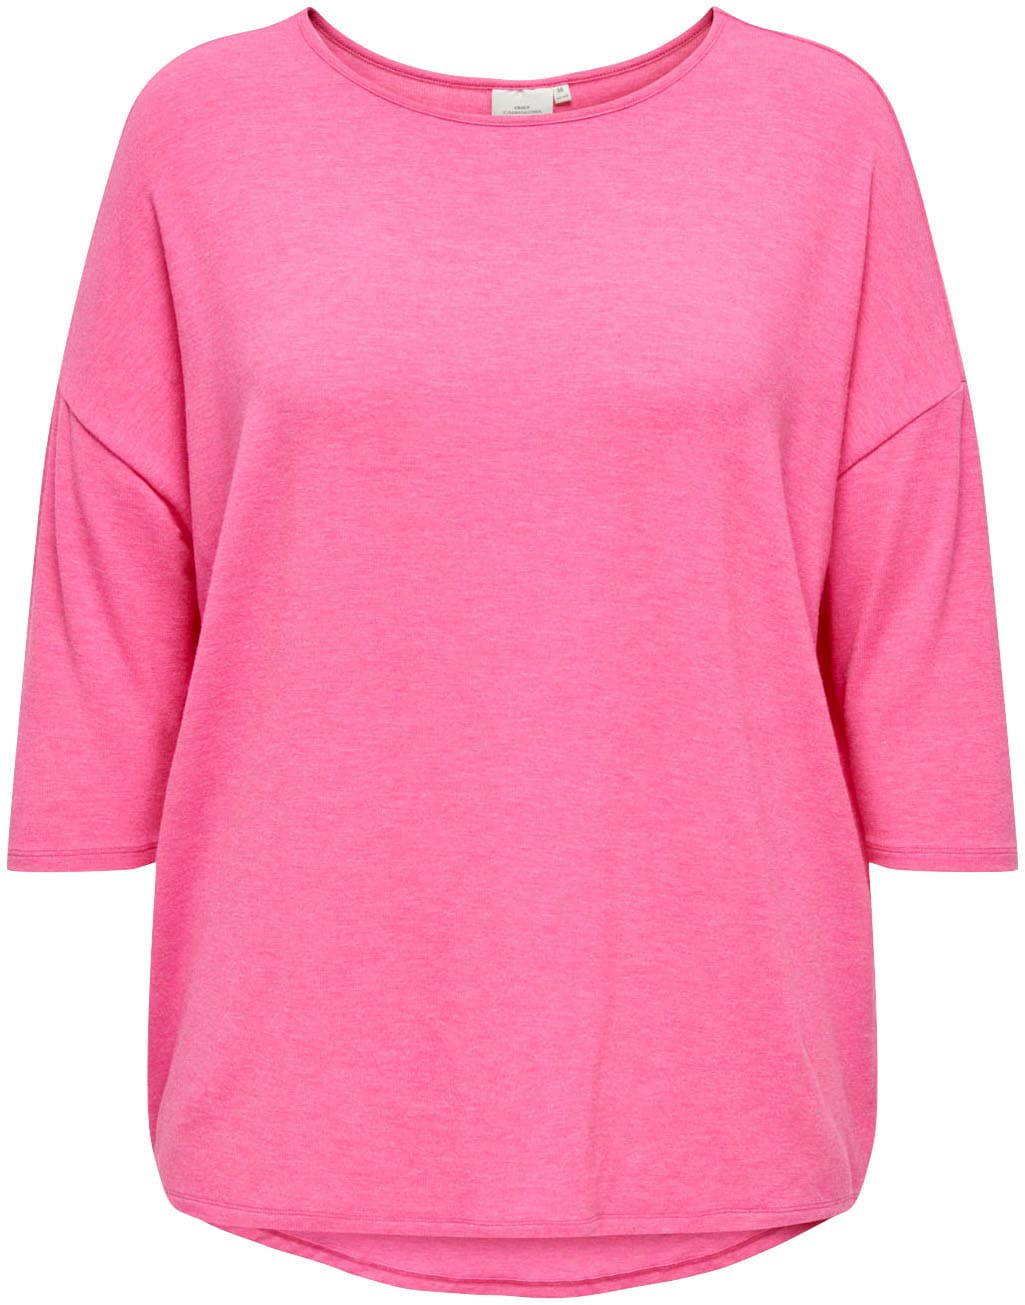 ONLY bei 3/4-Arm-Shirt 3/4 JRS NOOS« TOP OTTO kaufen »CARLAMOUR CARMAKOMA